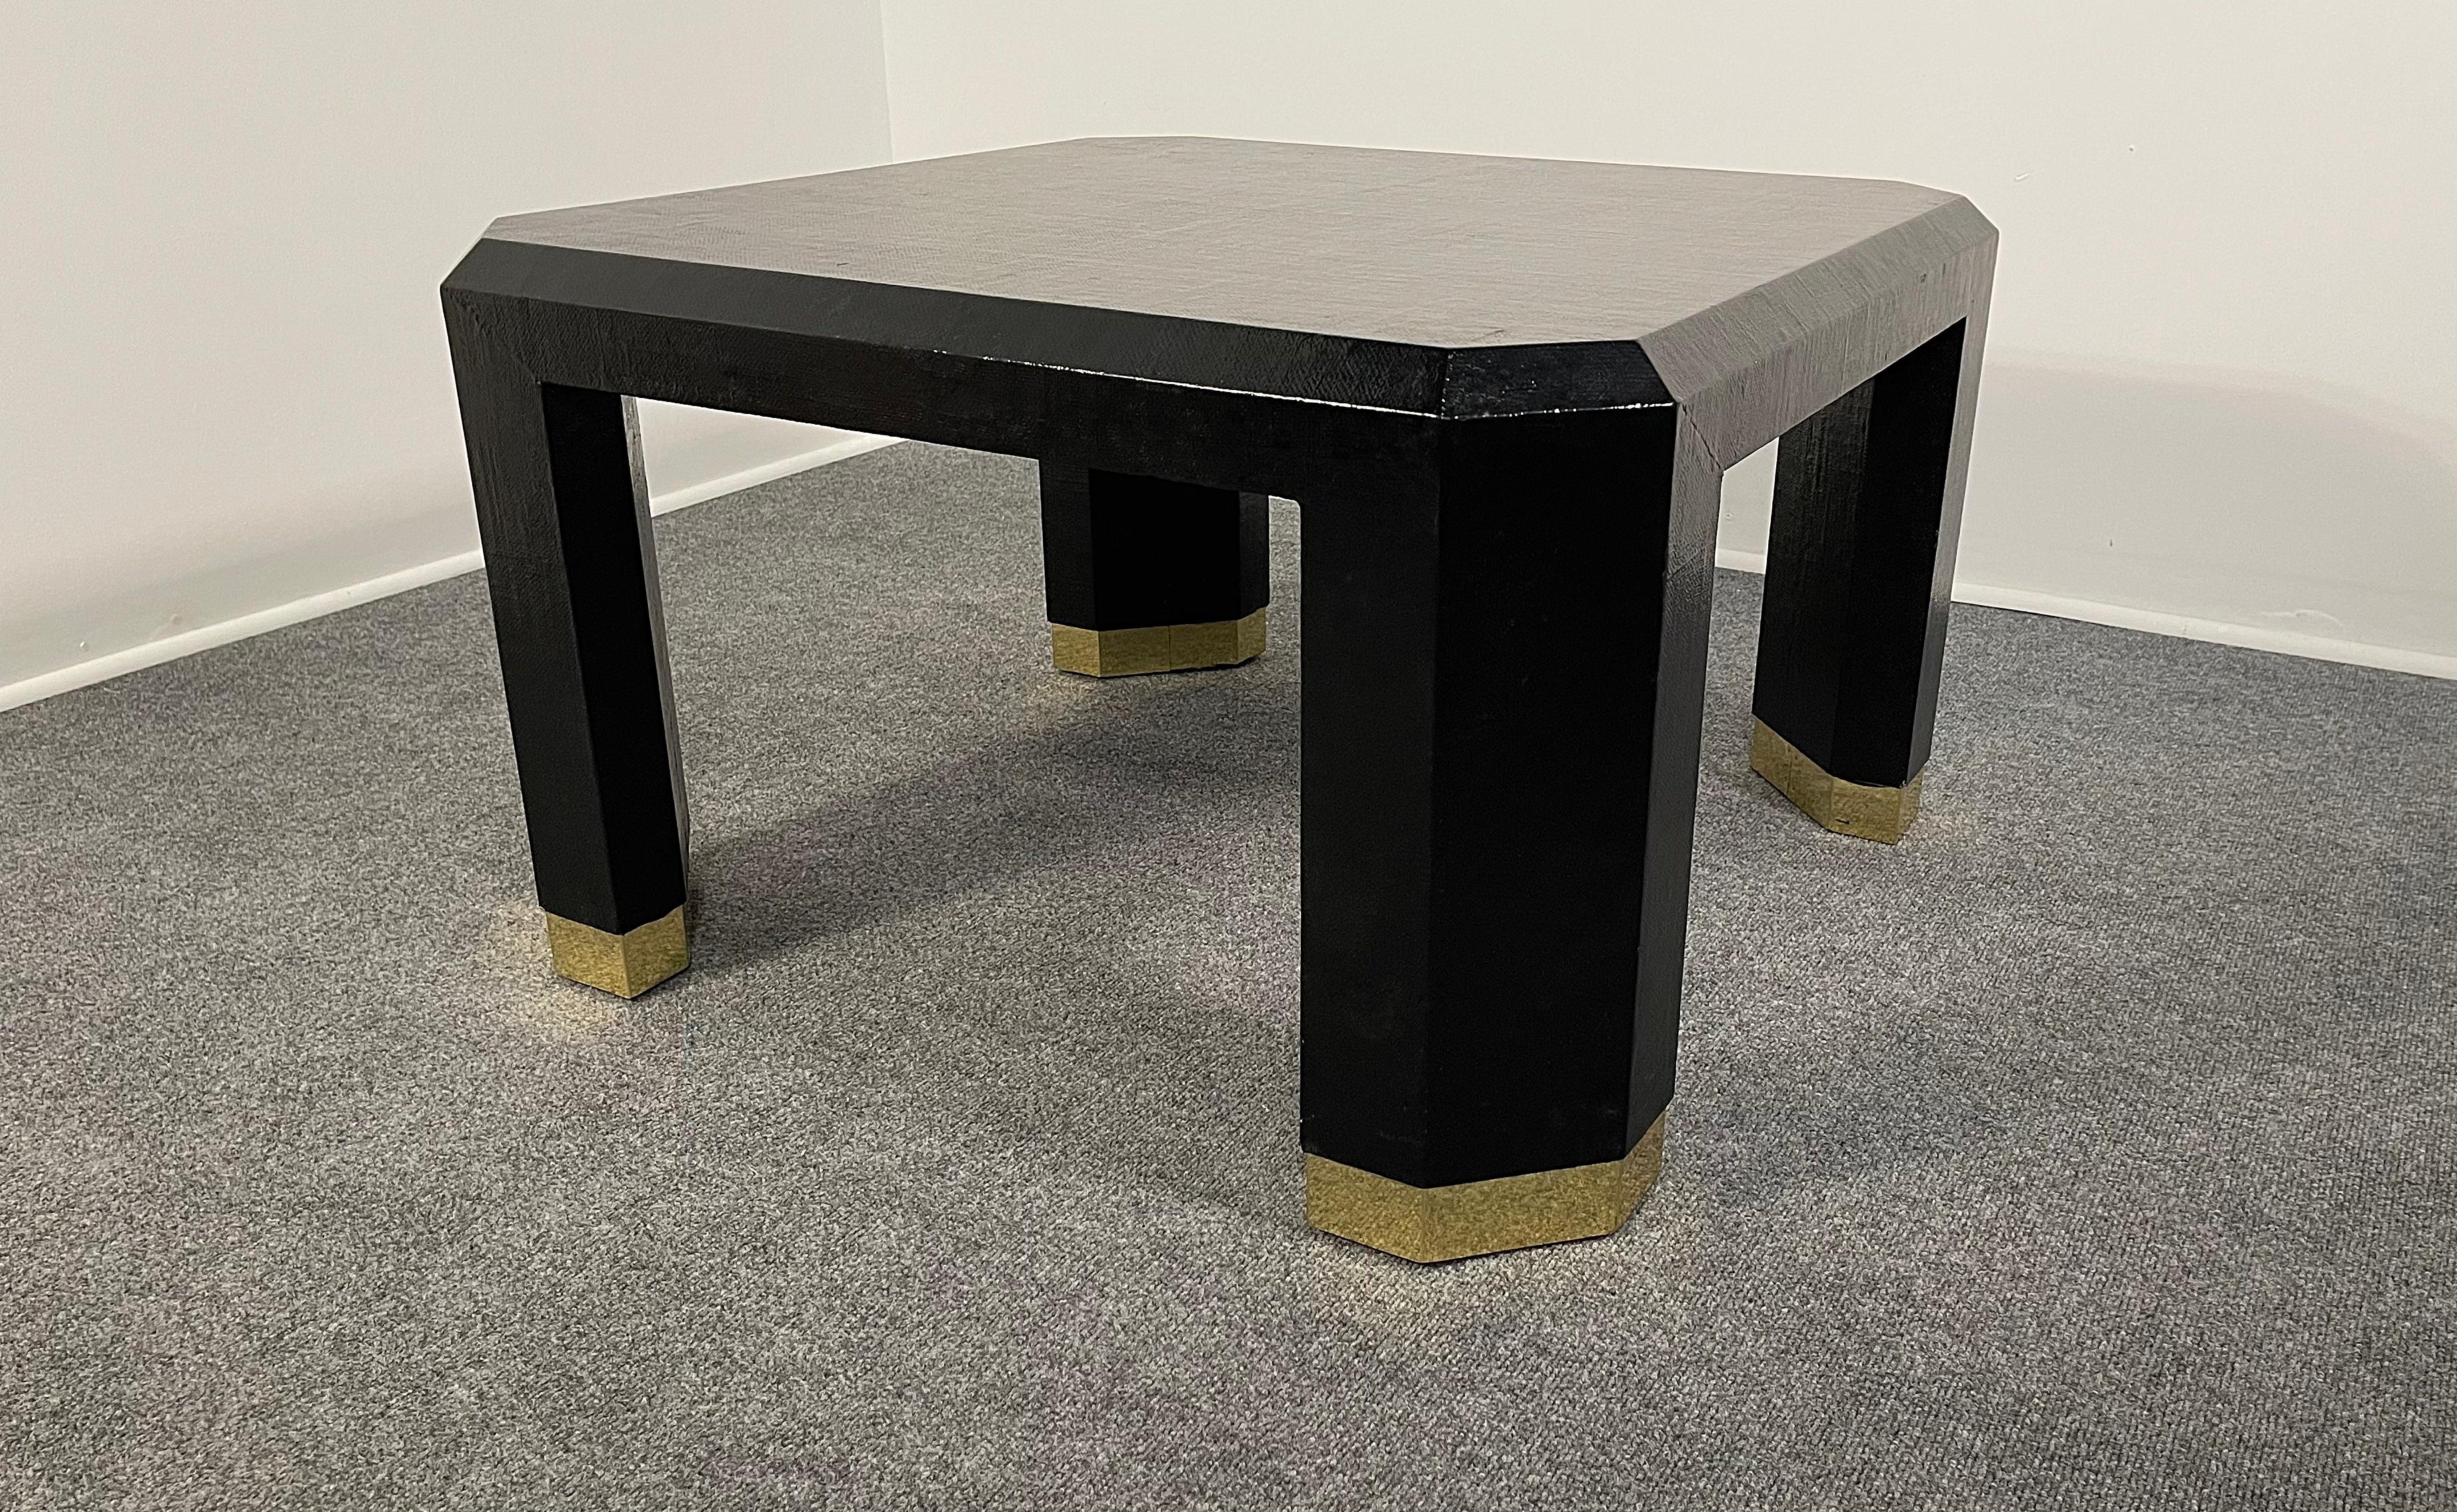 Each table overall covered in black Lacquer 